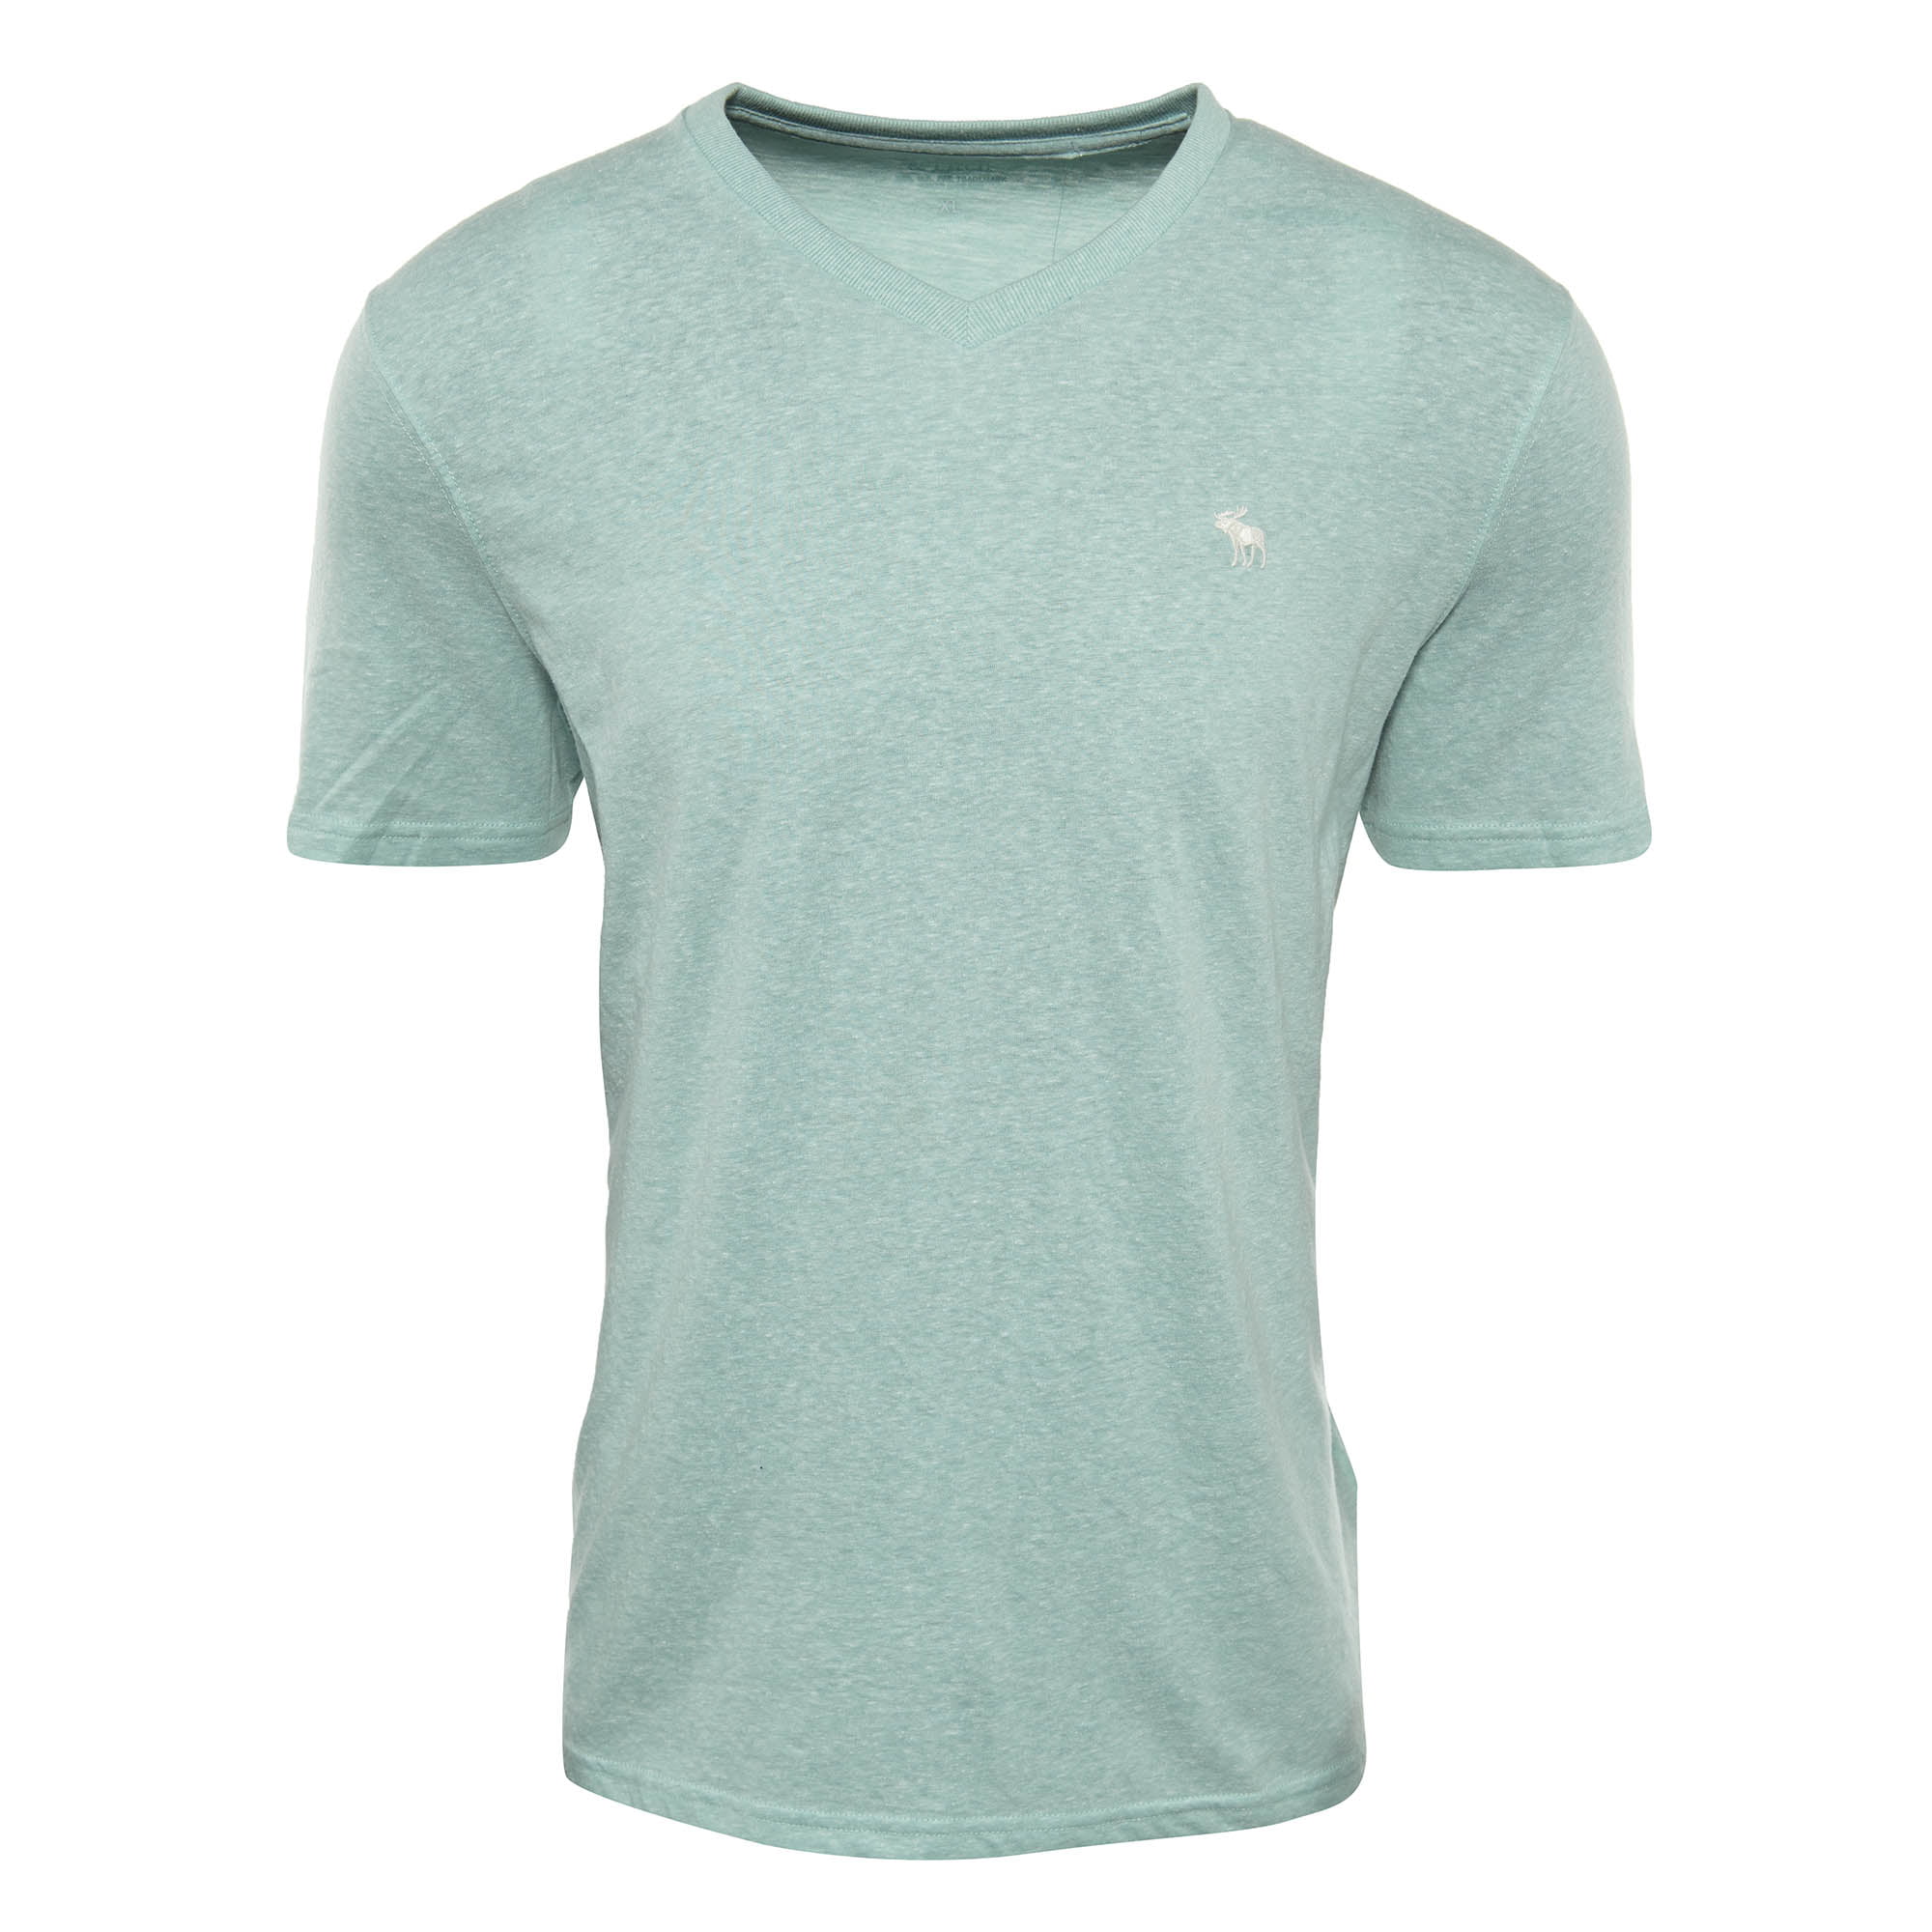 abercrombie fitch v neck t-shirt